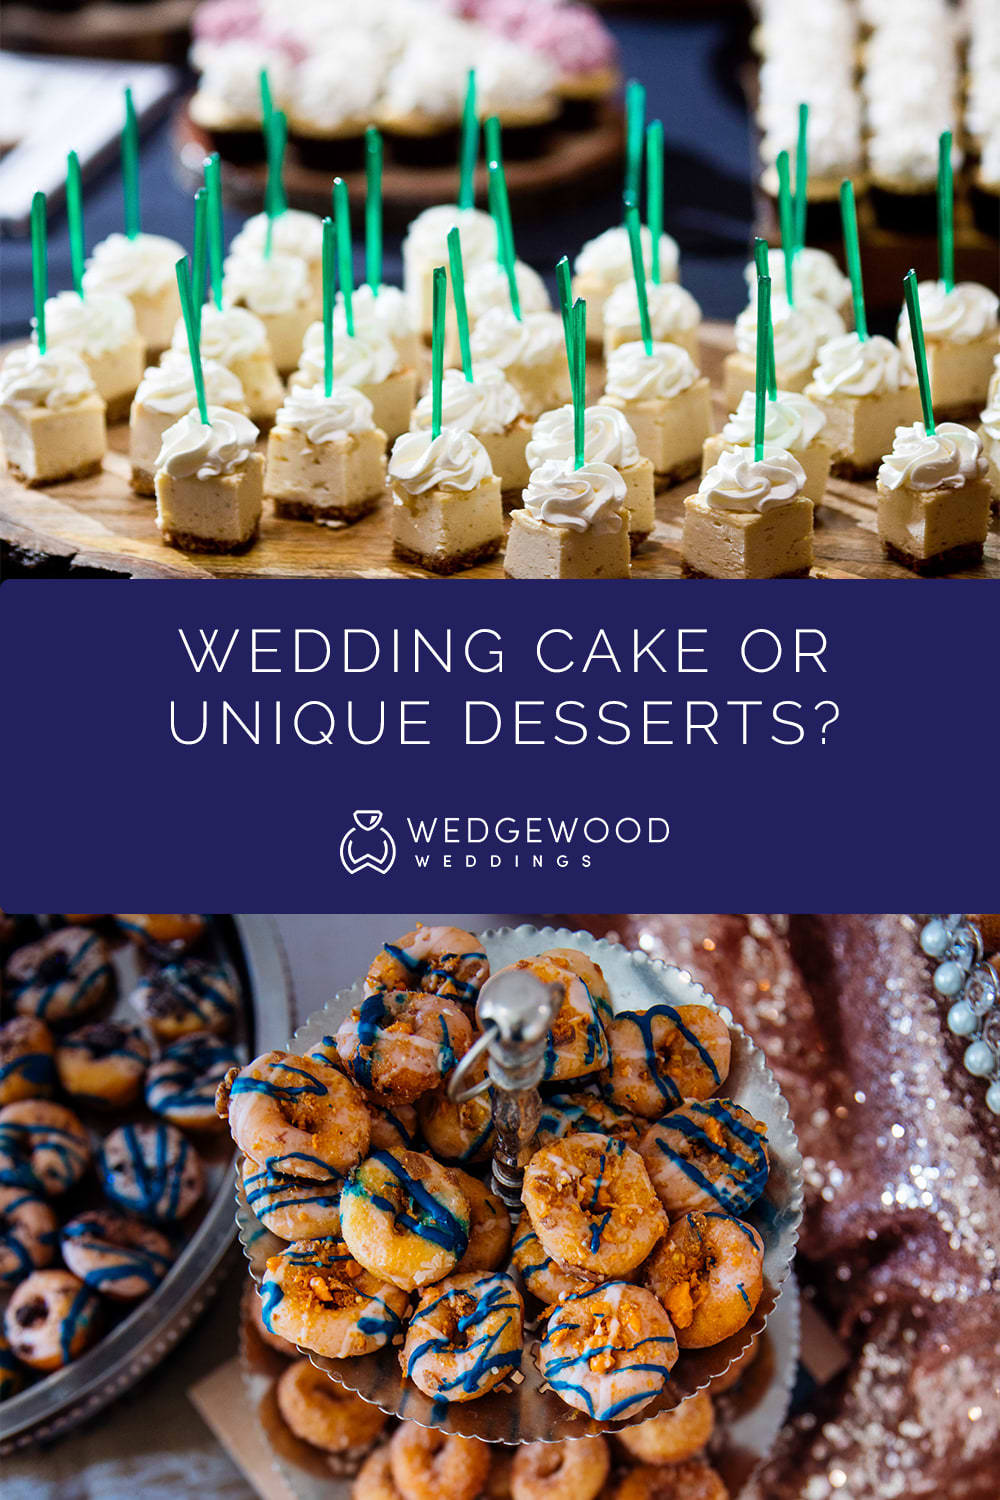 There are so many equally delicious alternatives to the typical wedding cake. Check out some of our suggestions here! Newlyweds often offer wedding cake alternatives at their reception. 69% of couples serve cake—but 53% also serve an alternative wedding dessert